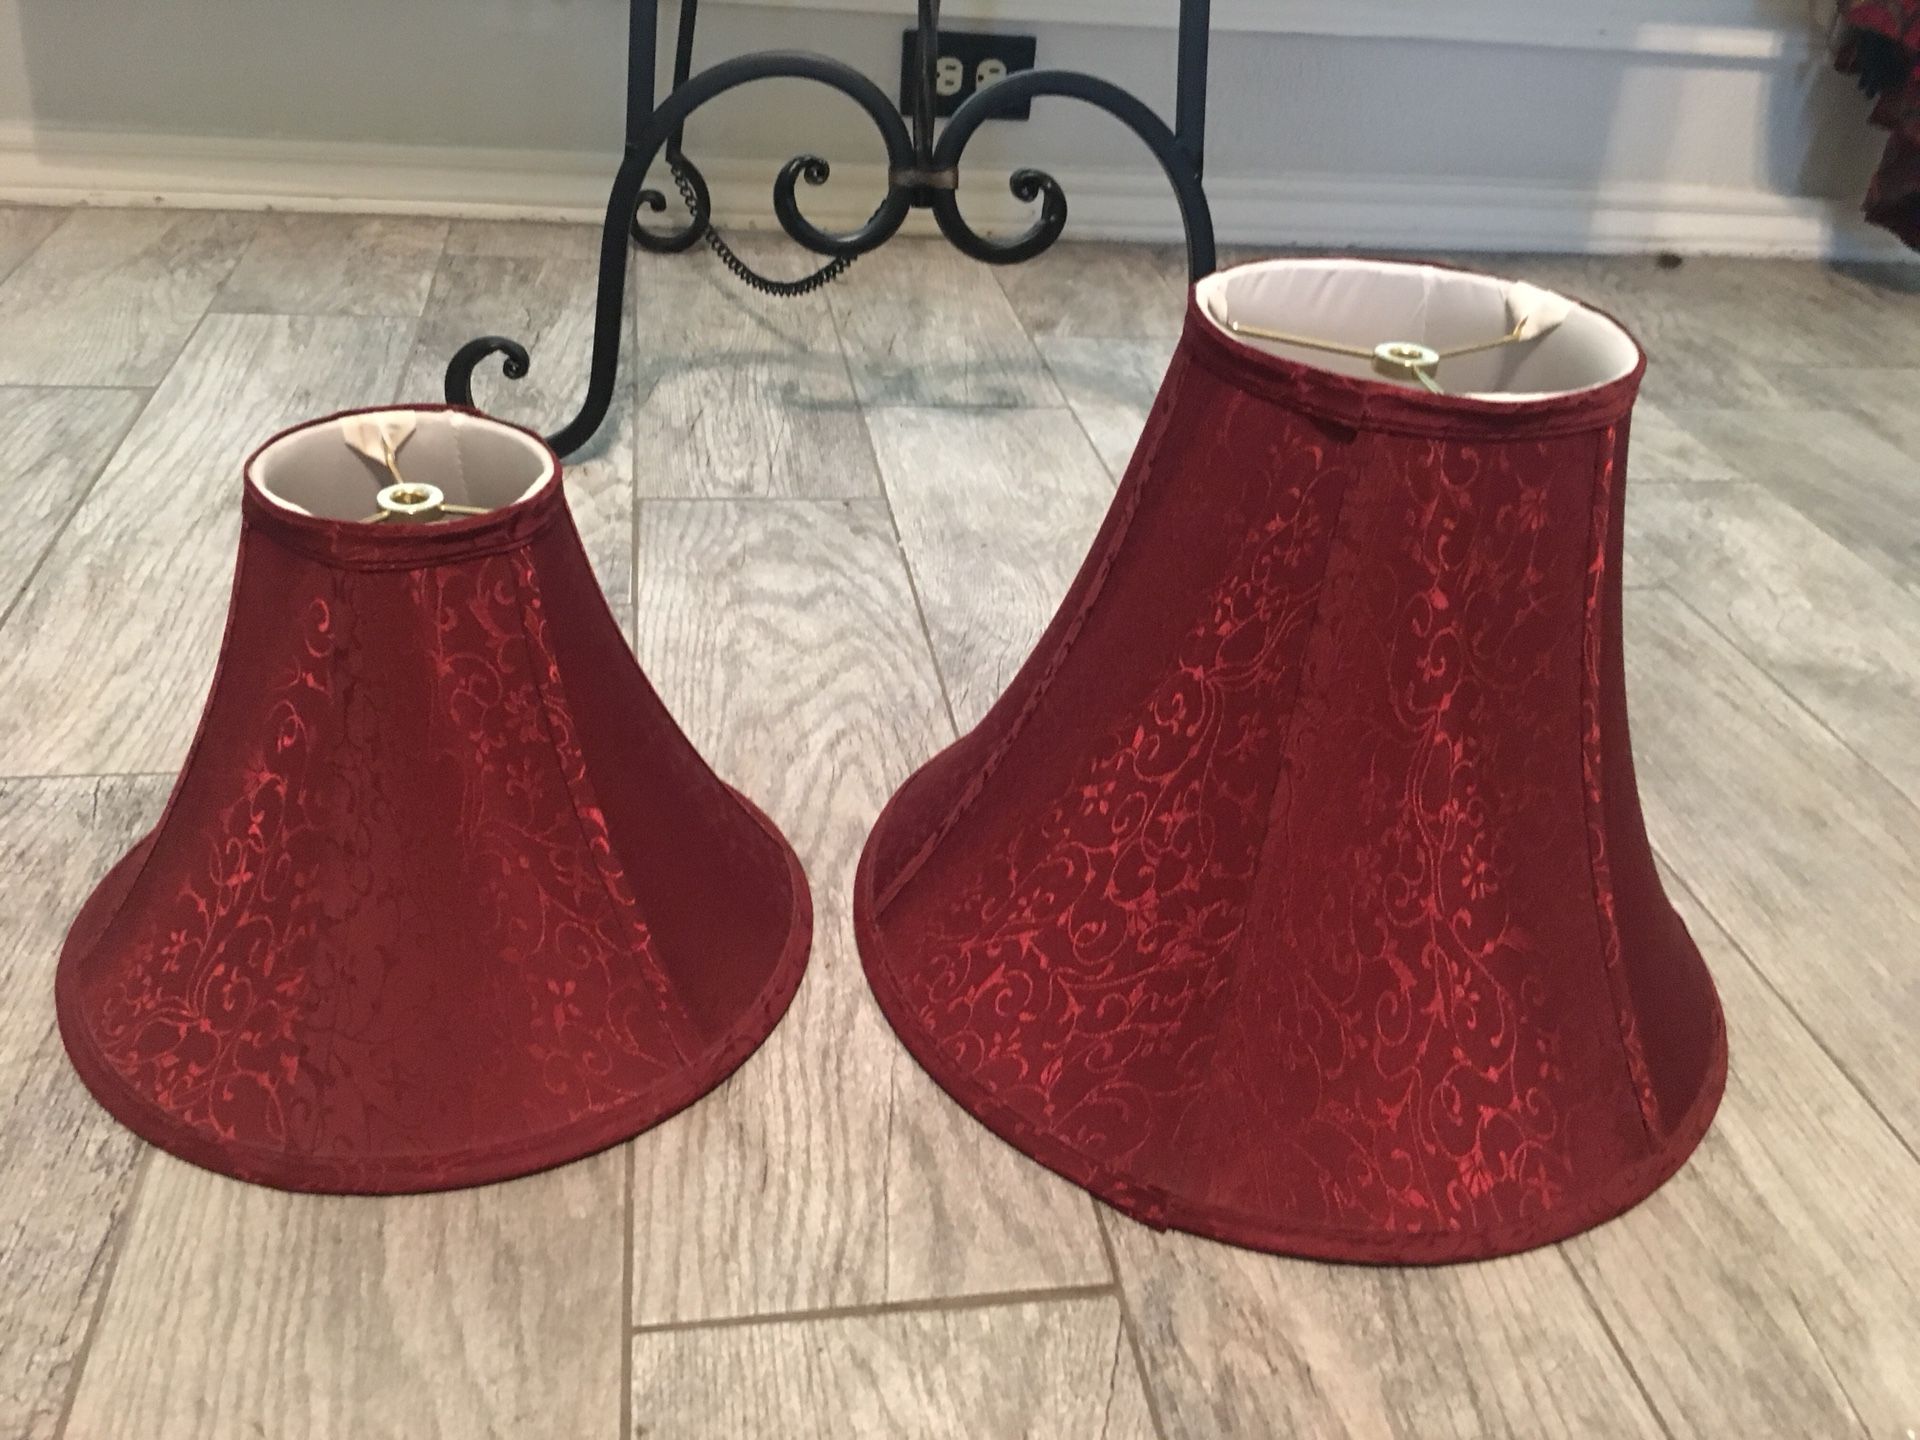 Two Brand New Burgundy Lamp Shades House Decor